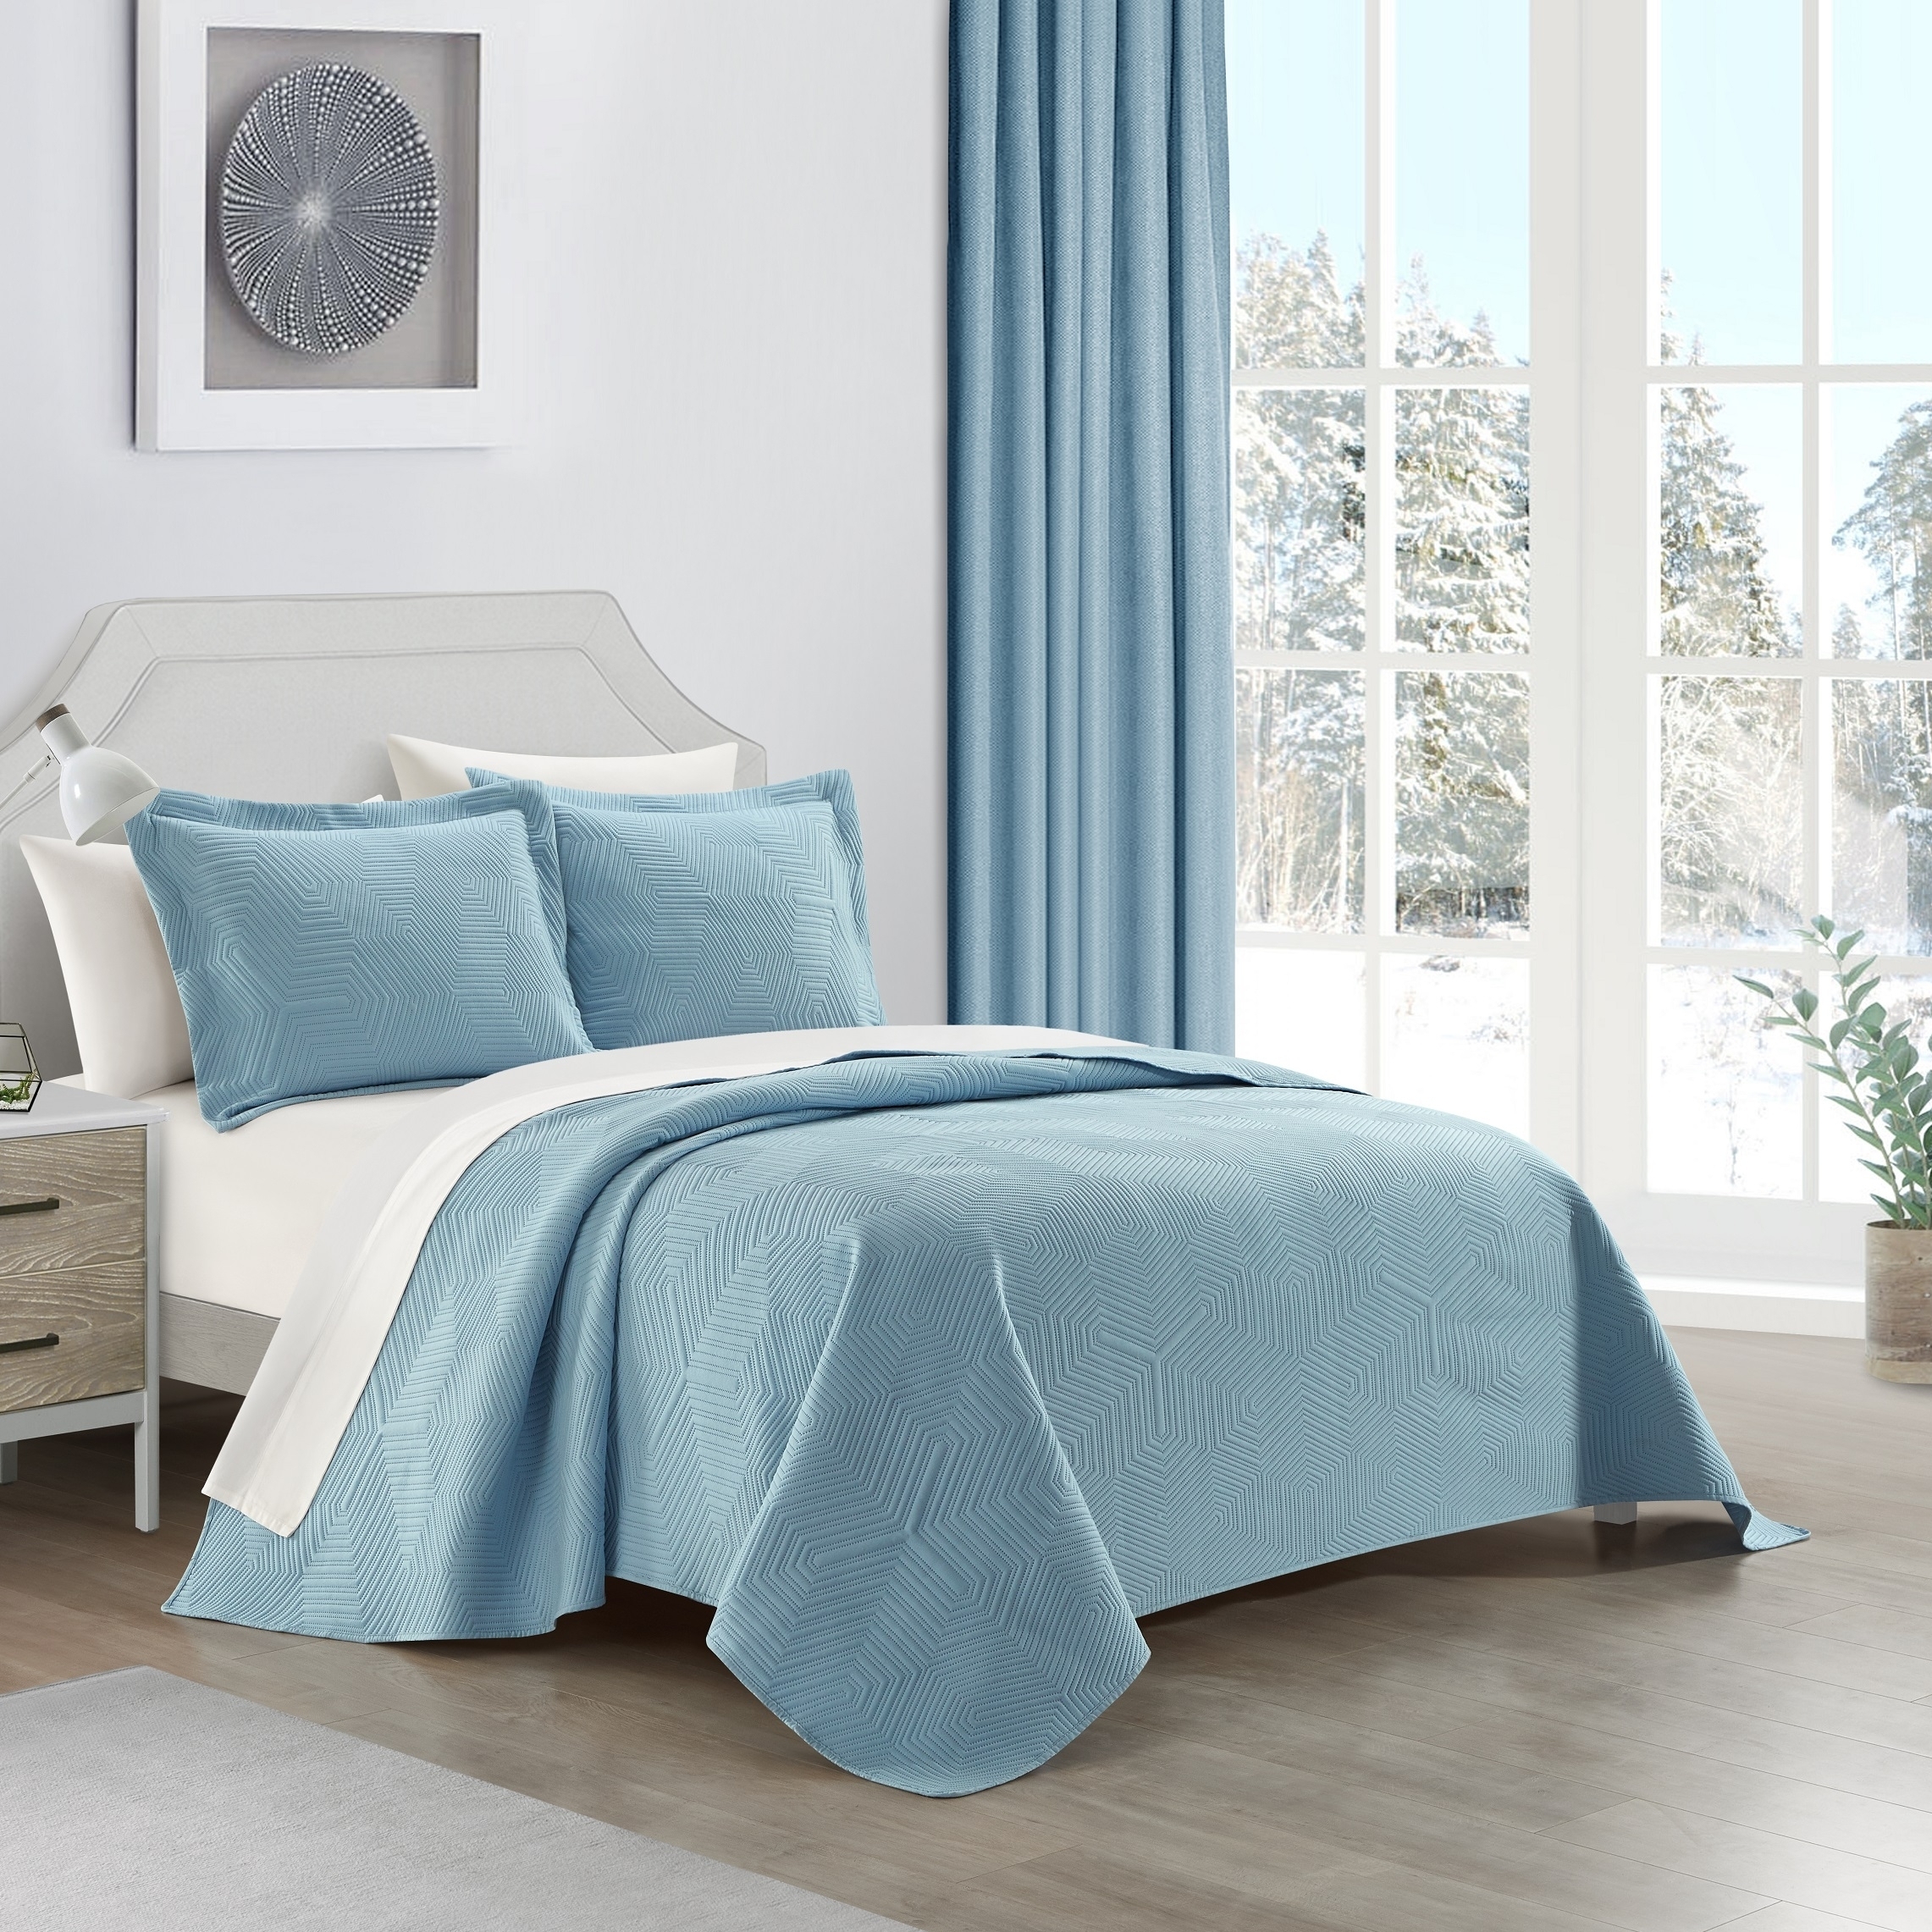 NY&CO Home Idge 3 Piece Quilt Set Y-Shaped Geometric Pattern Bedding - Blue, King